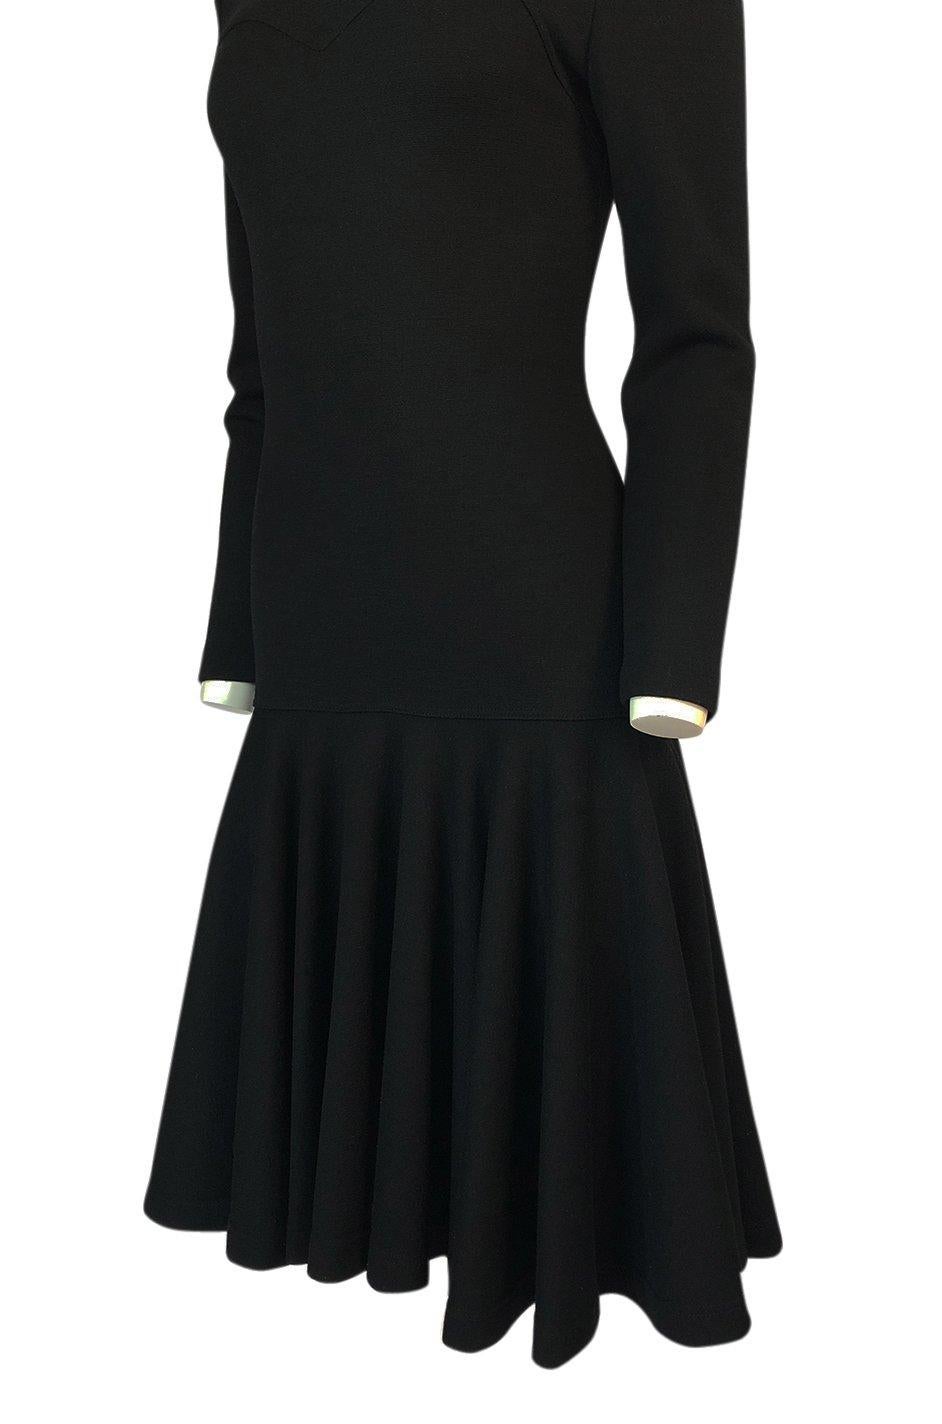 Fall 1988 Patrick Kelly Black Knit Fitted & Flared Skirt Dress 4